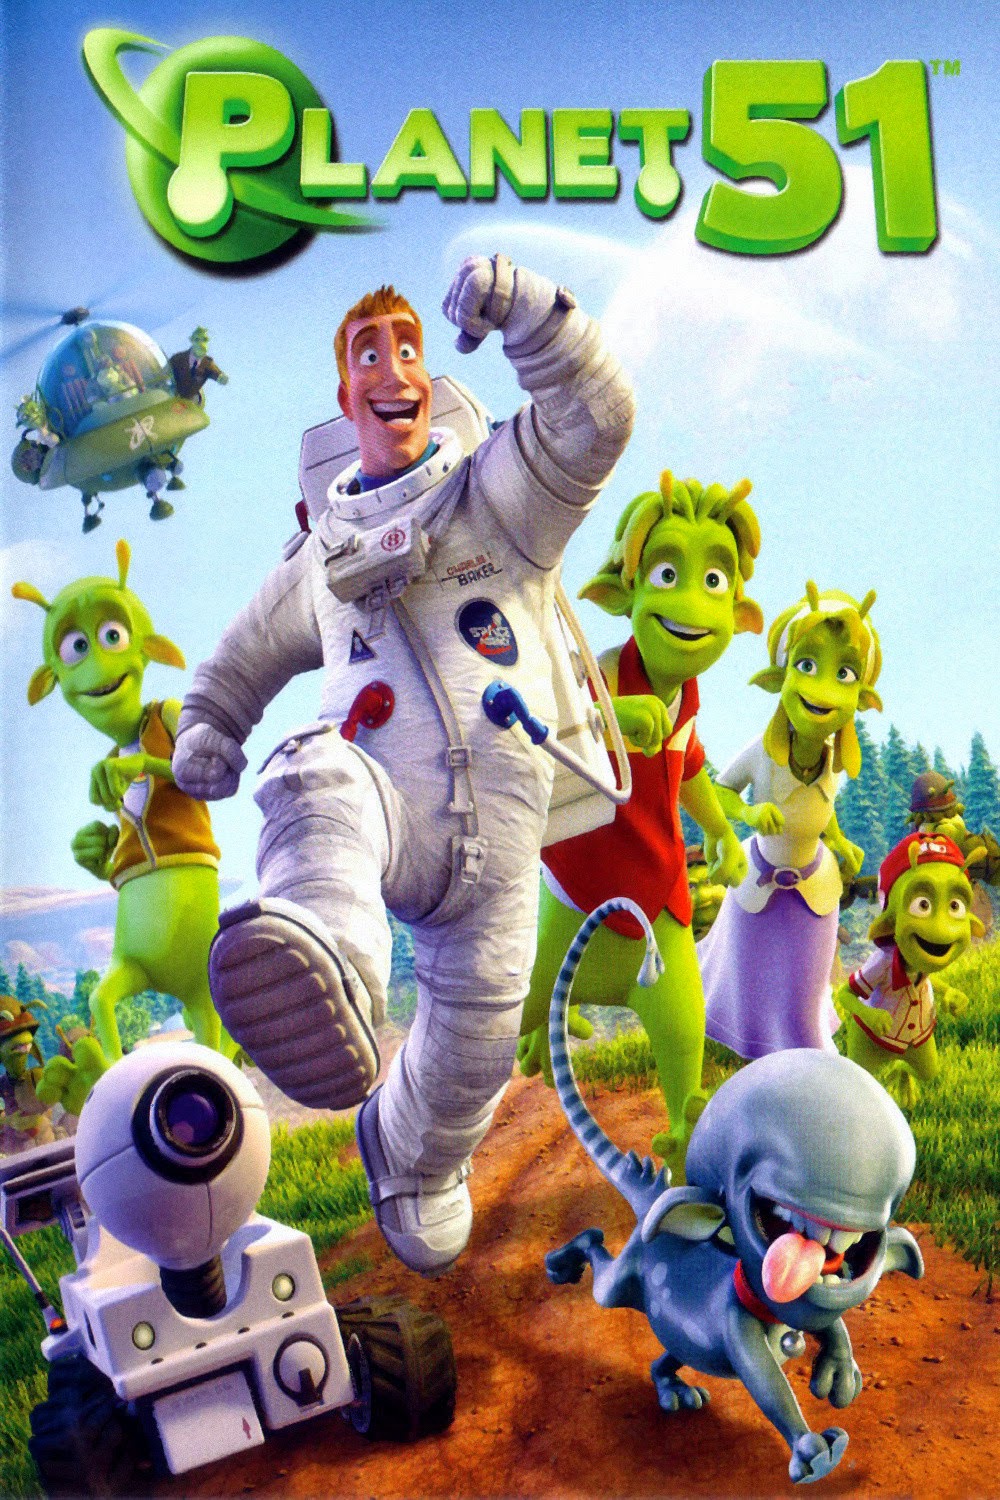 Watch Planet 51 (2009) Online For Free Full Movie English Stream